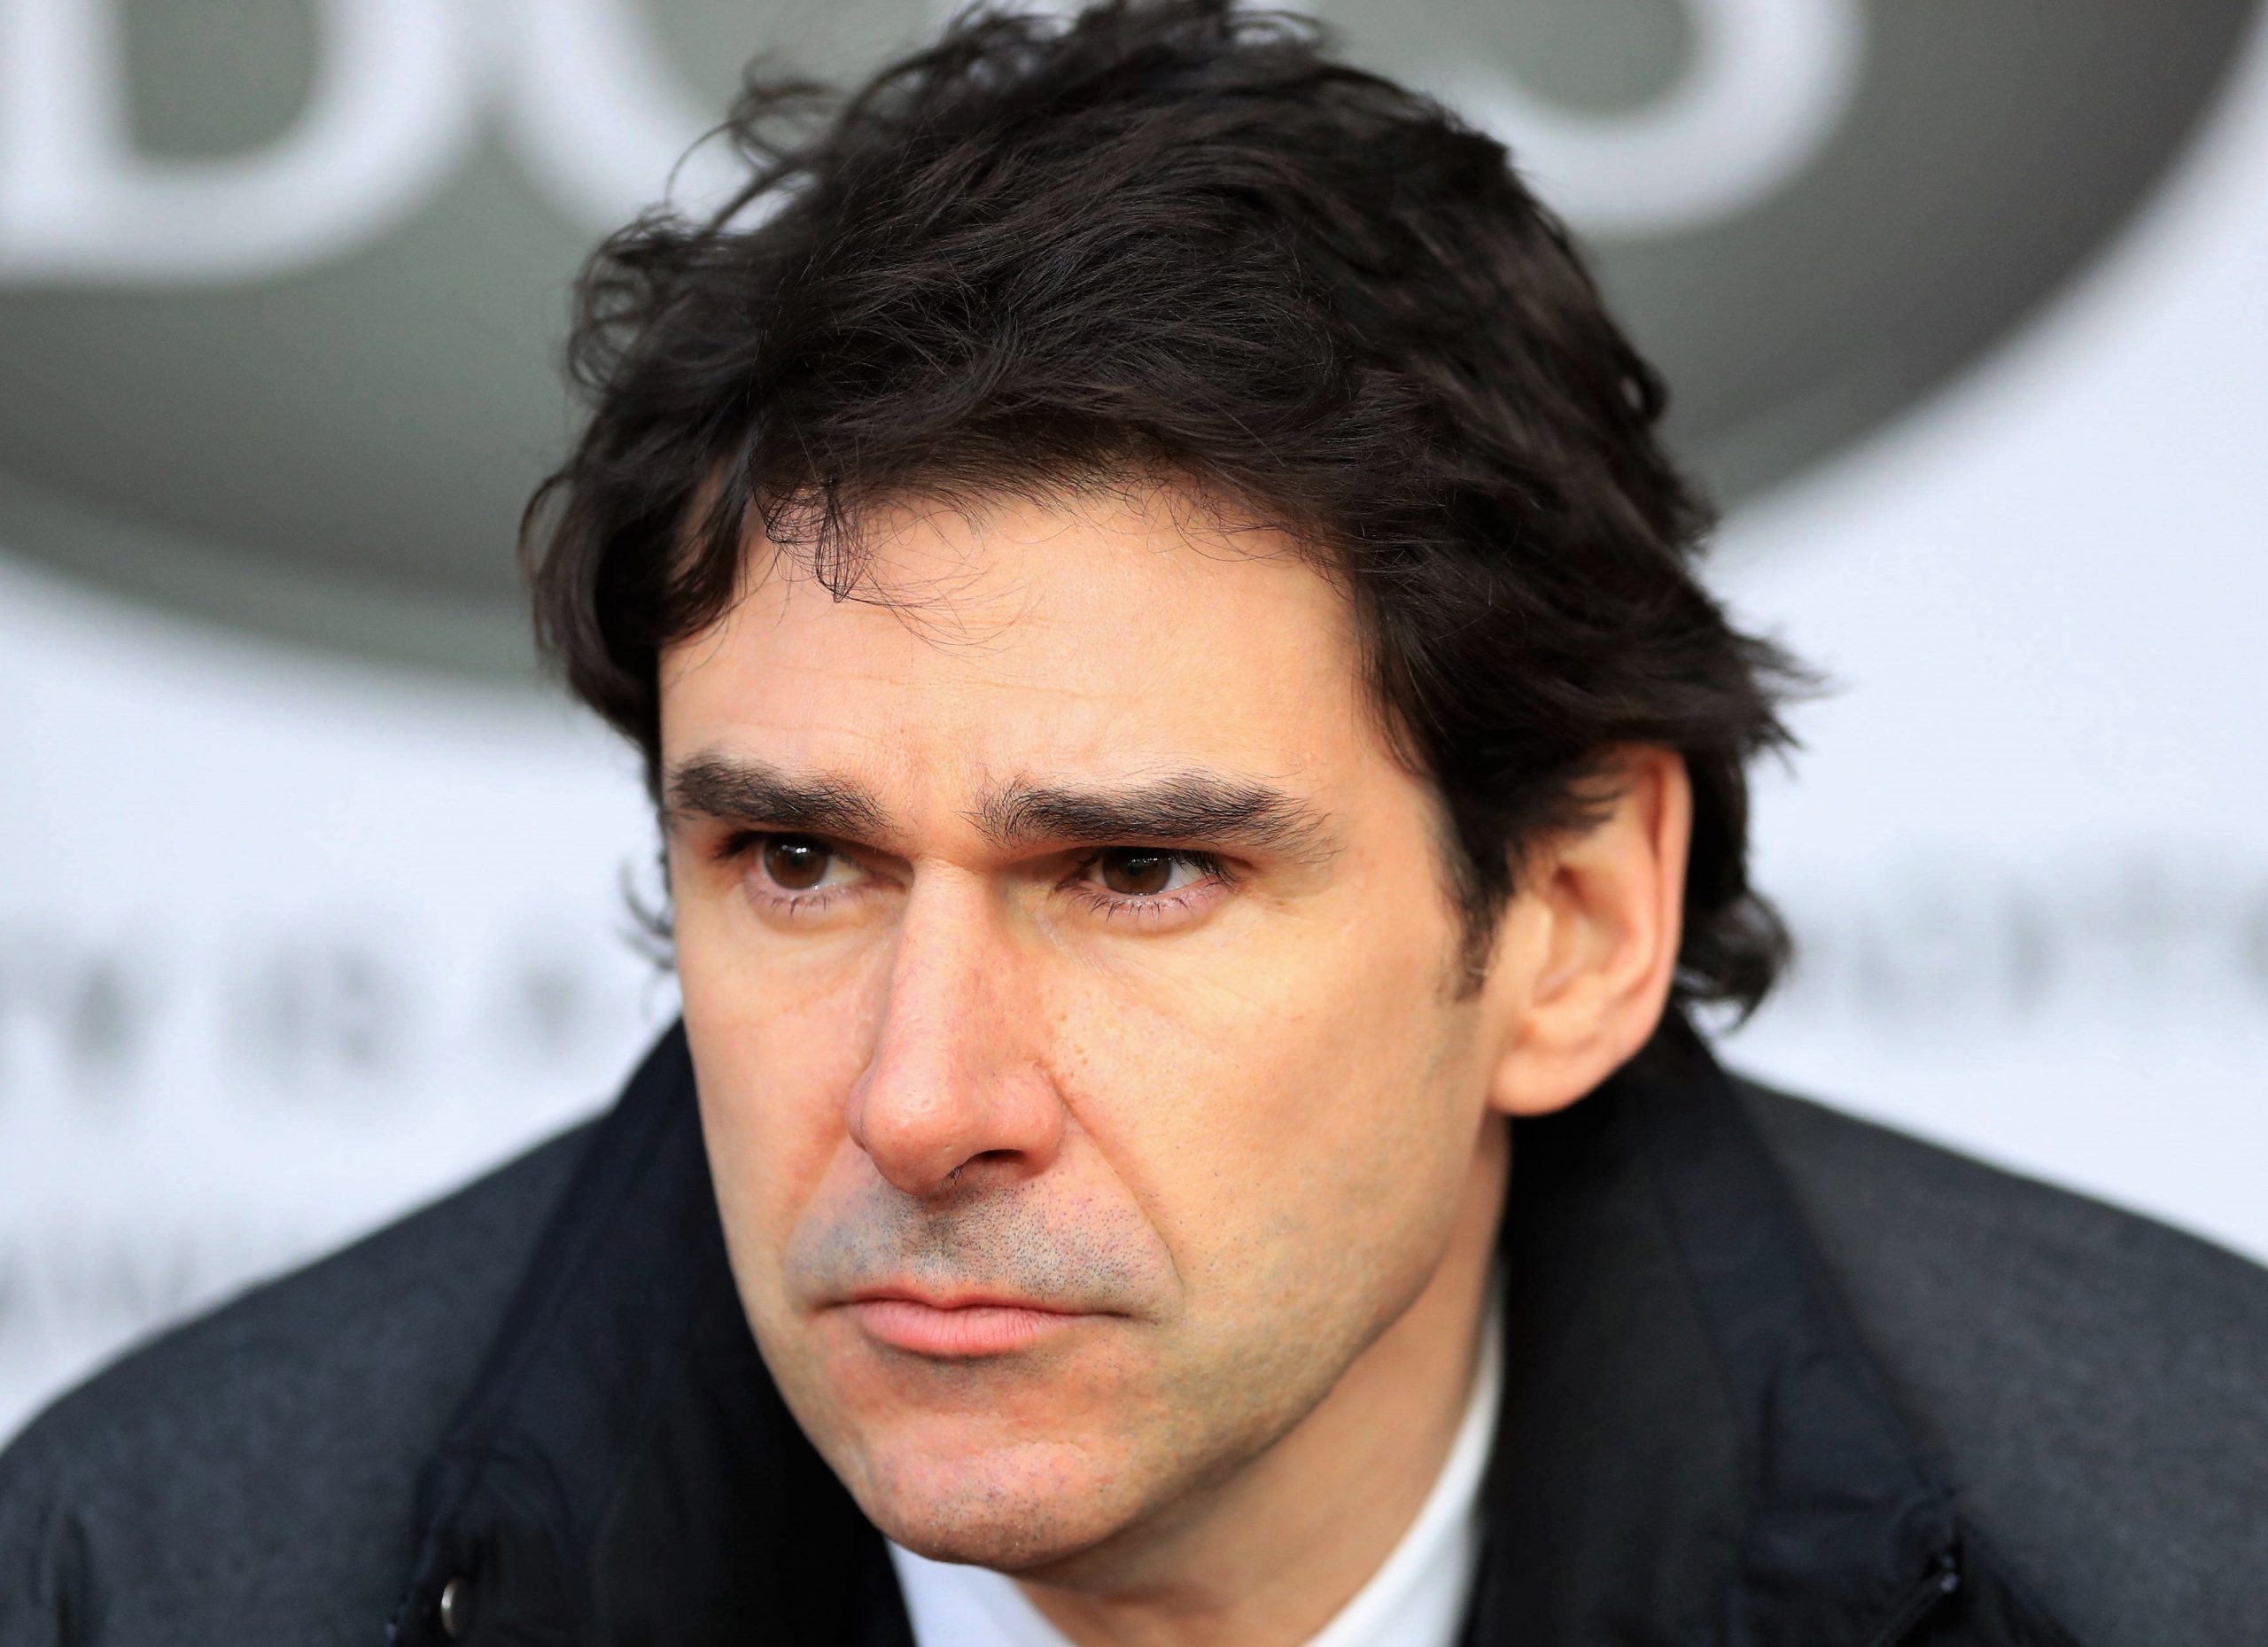 Aitor Karanka celebrates his 10th anniversary as a head coach and tells Marca all about his journey